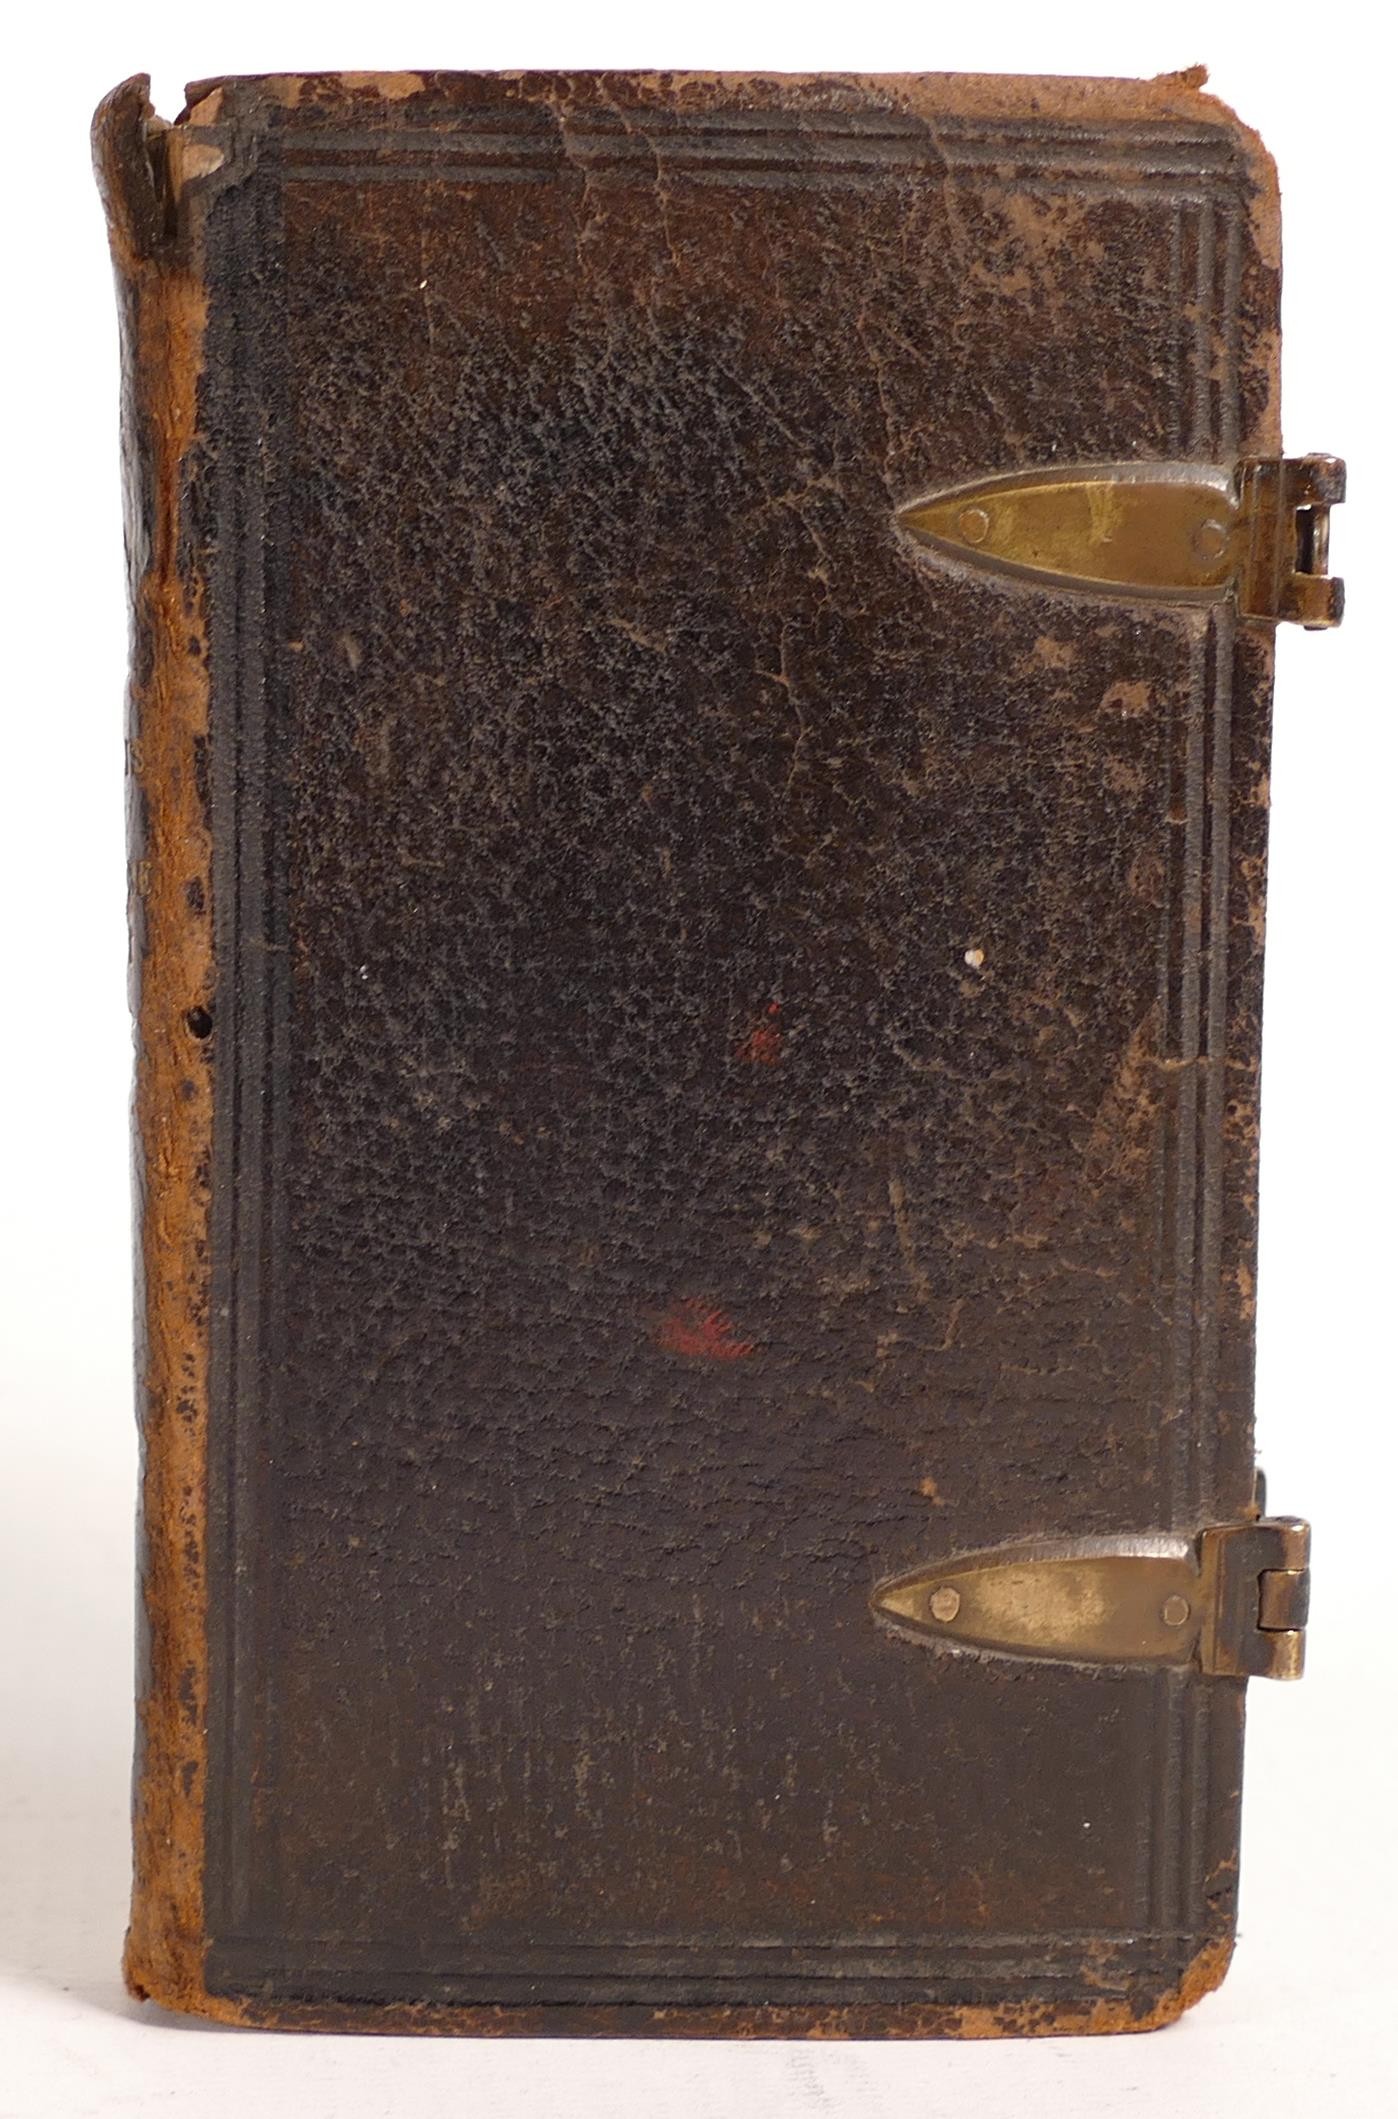 Thomas A Kempis The imitation of Christ - An early leather bound book with original brass clasps.